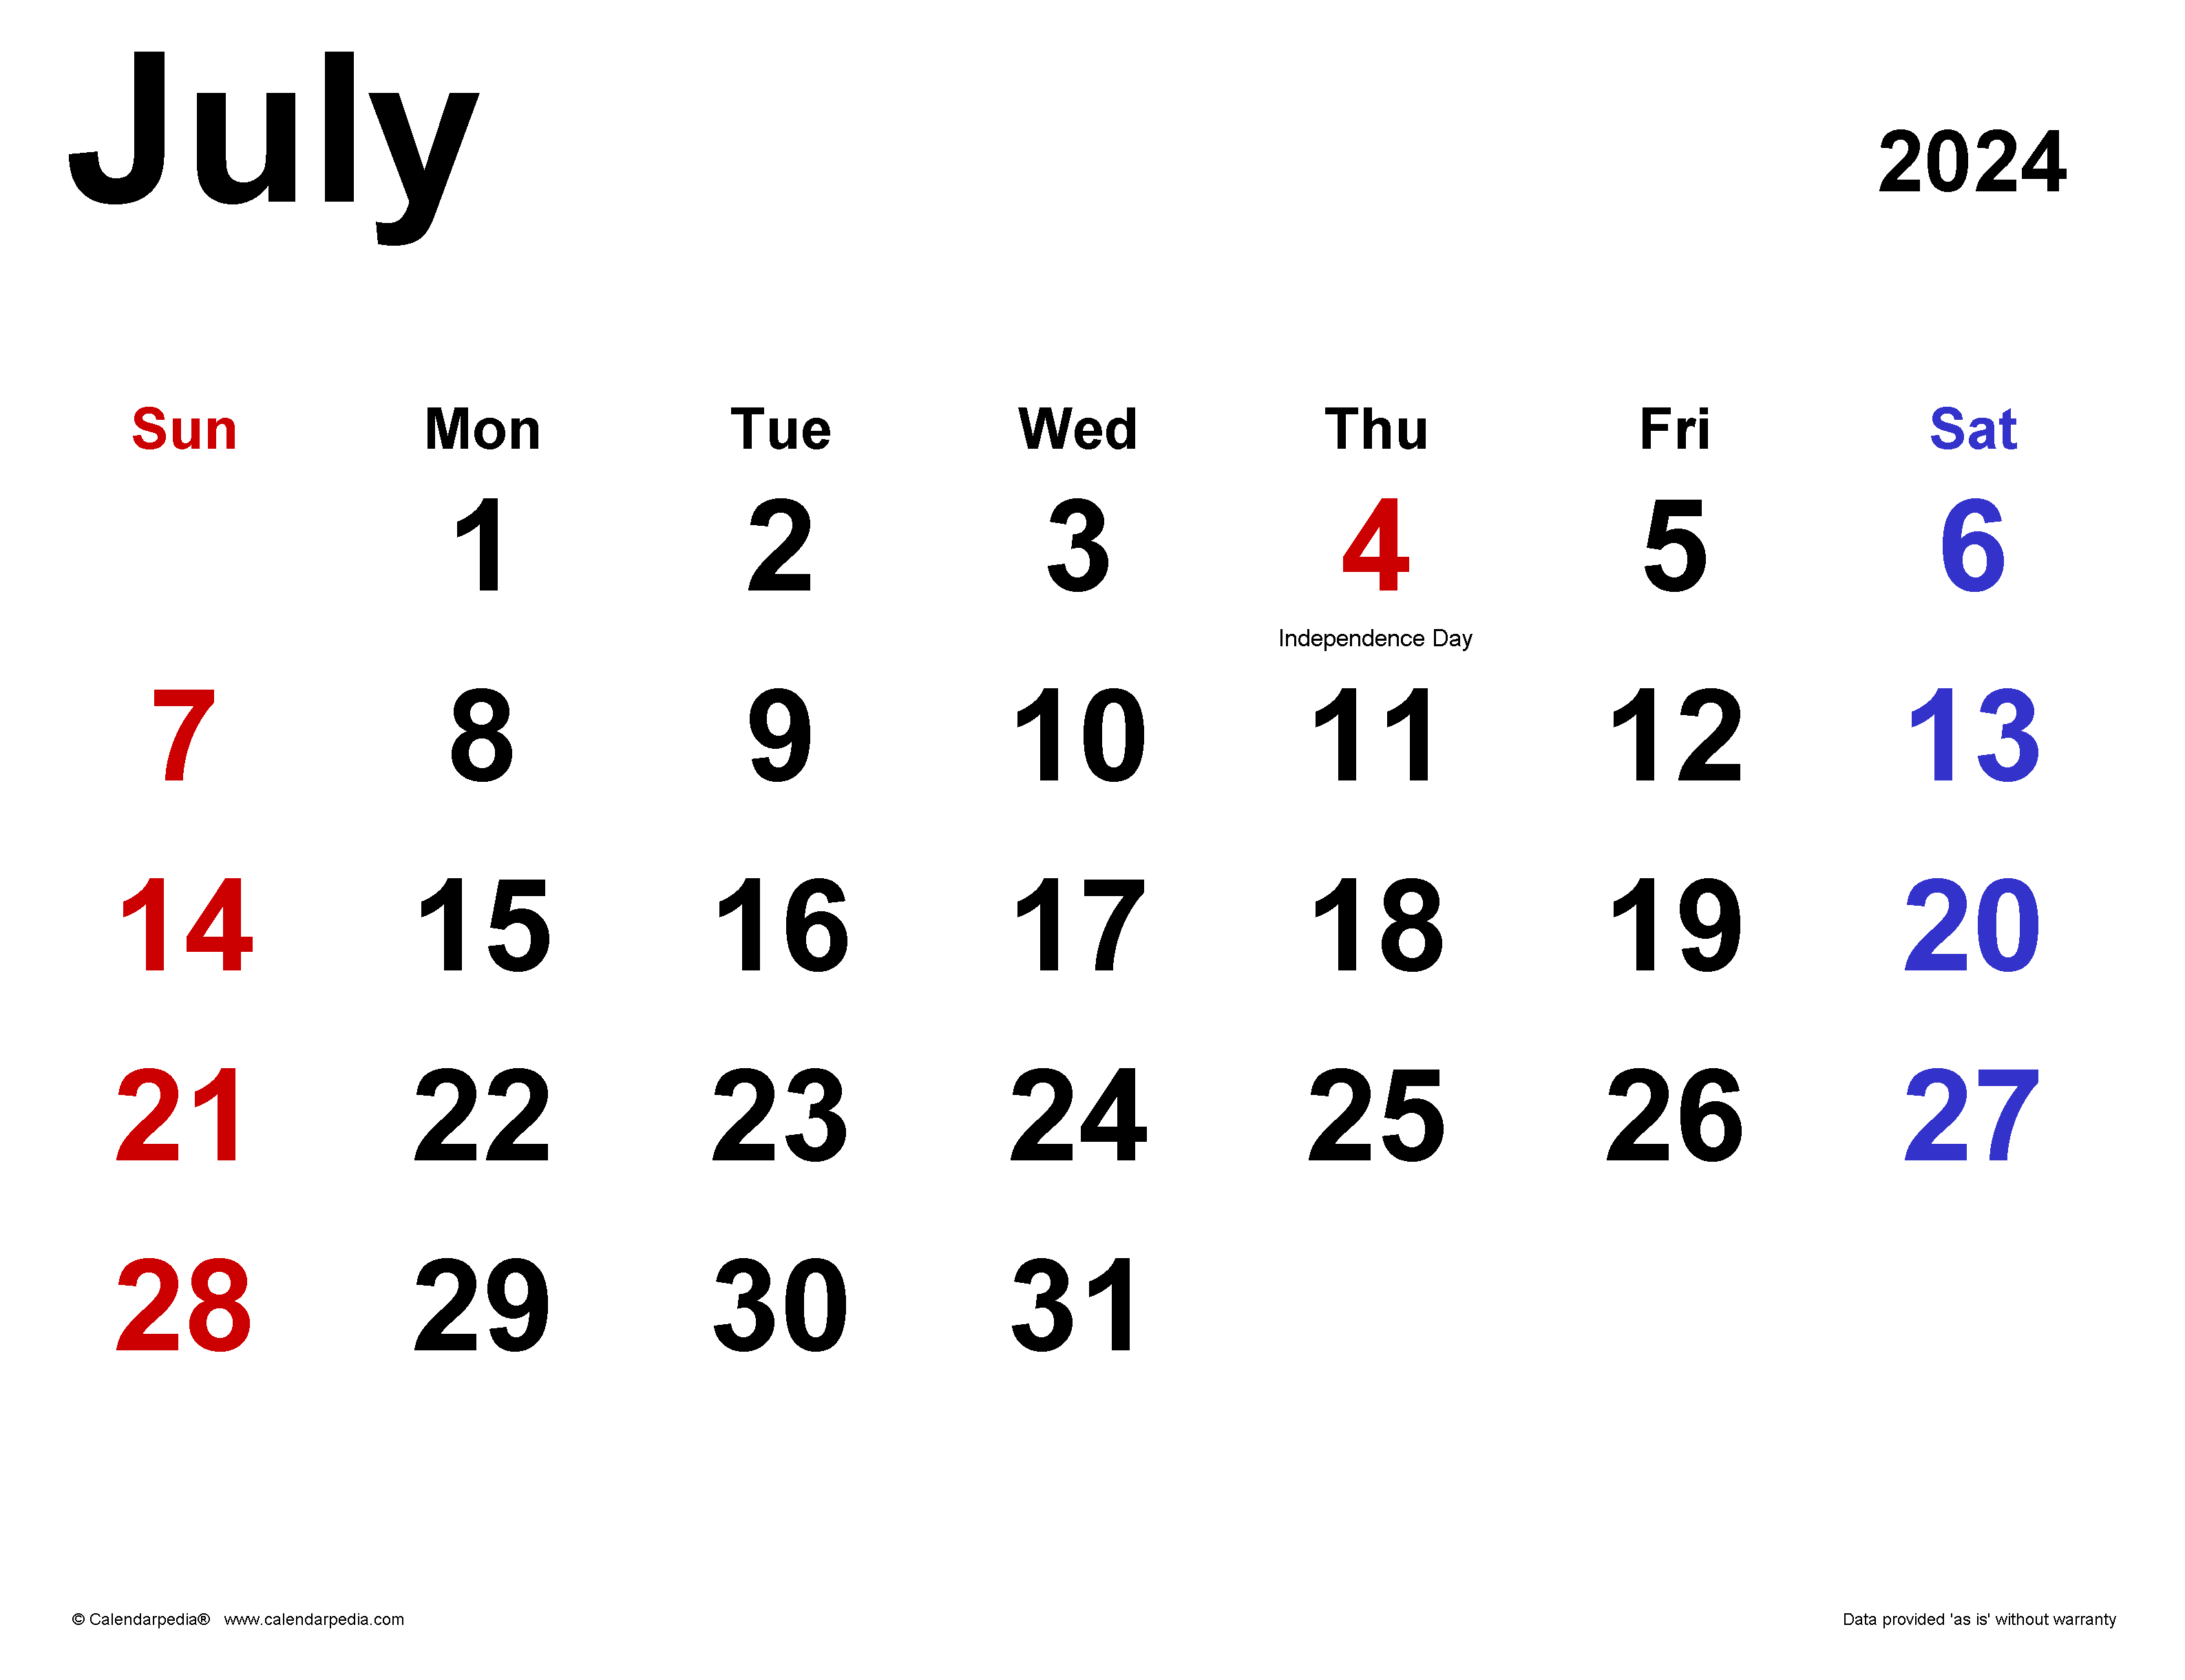 July 2024 Calendar | Templates For Word, Excel And Pdf pertaining to 7 Month Wall Calendar Starting July 2024